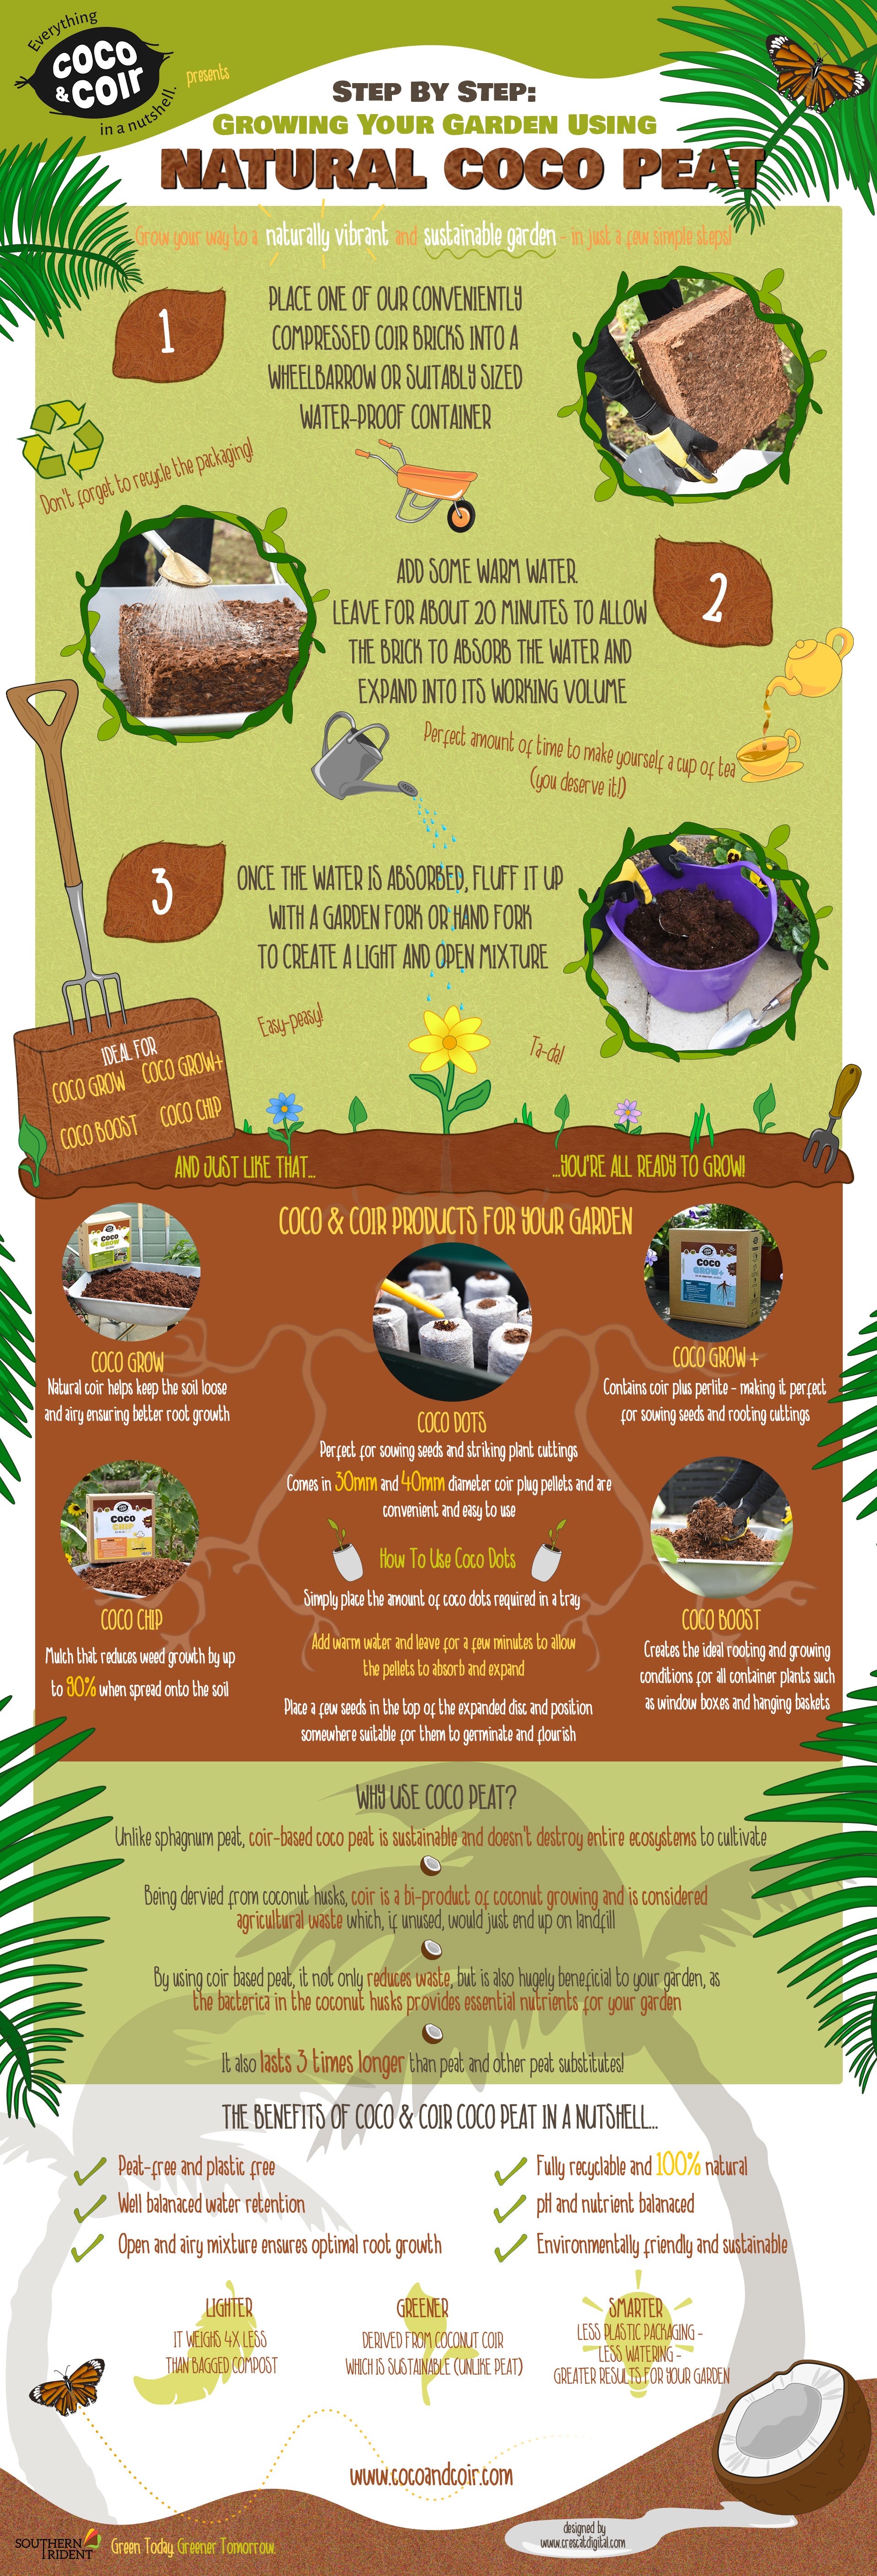 Step By Step: Growing Your Garden With Natural Coco Peat